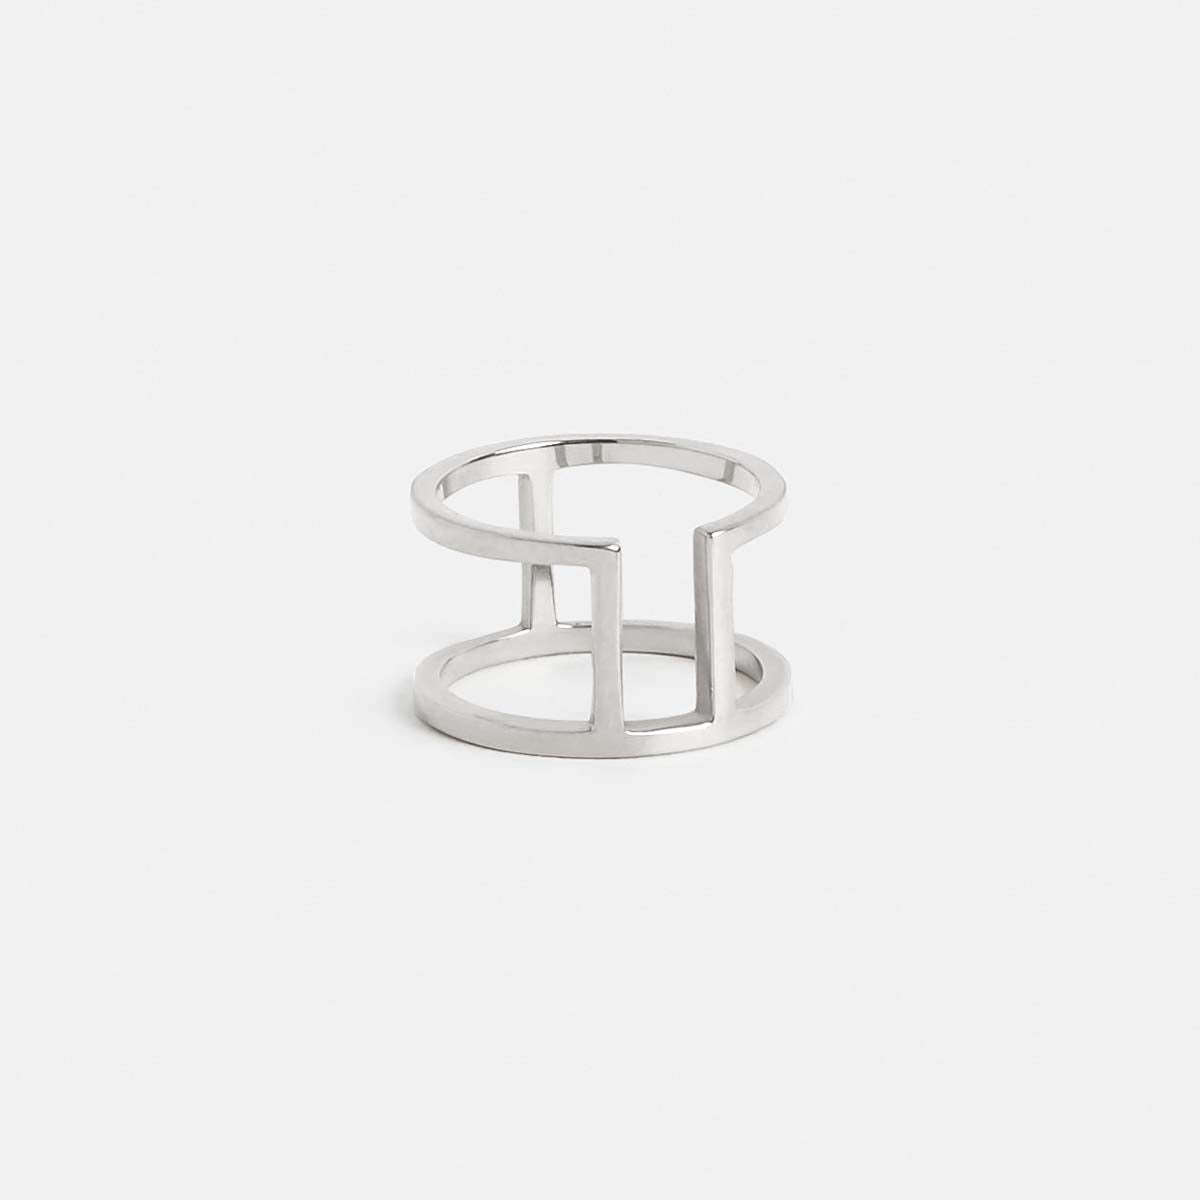 Cote Unique Ring in Sterling Silver by SHW Fine Jewelry New York City